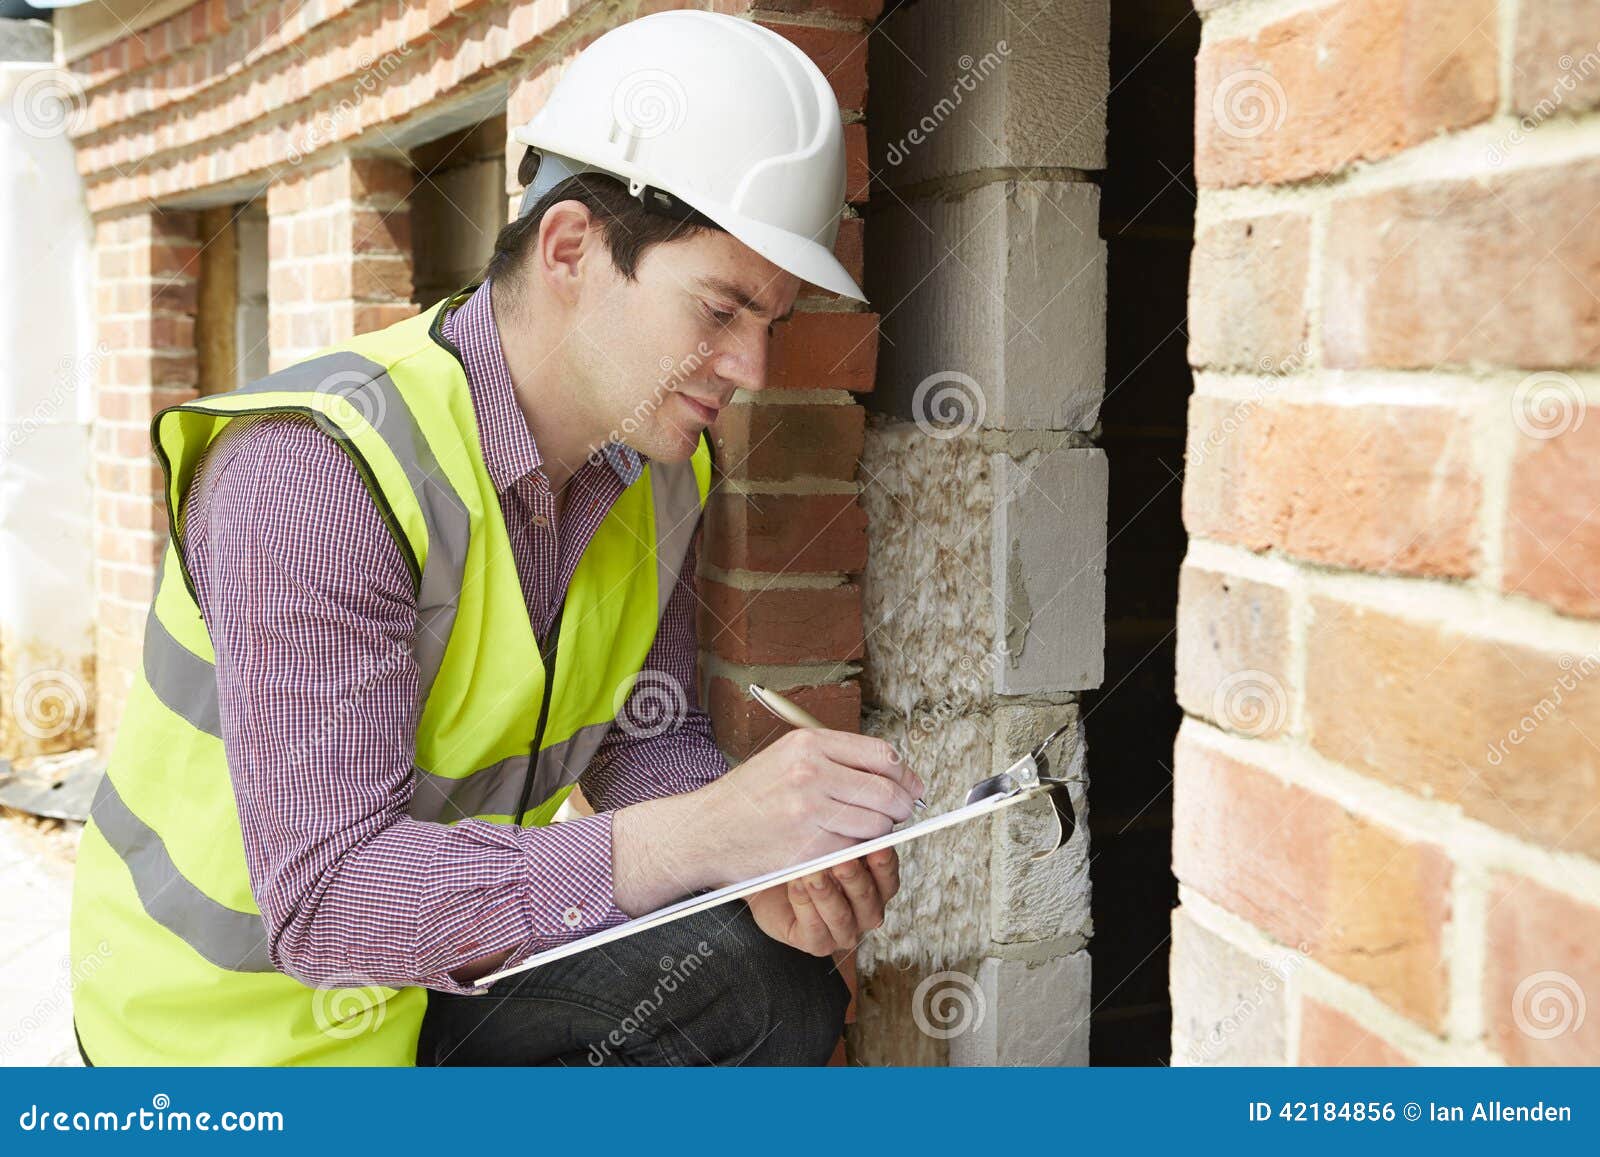 architect checking insulation during house construction